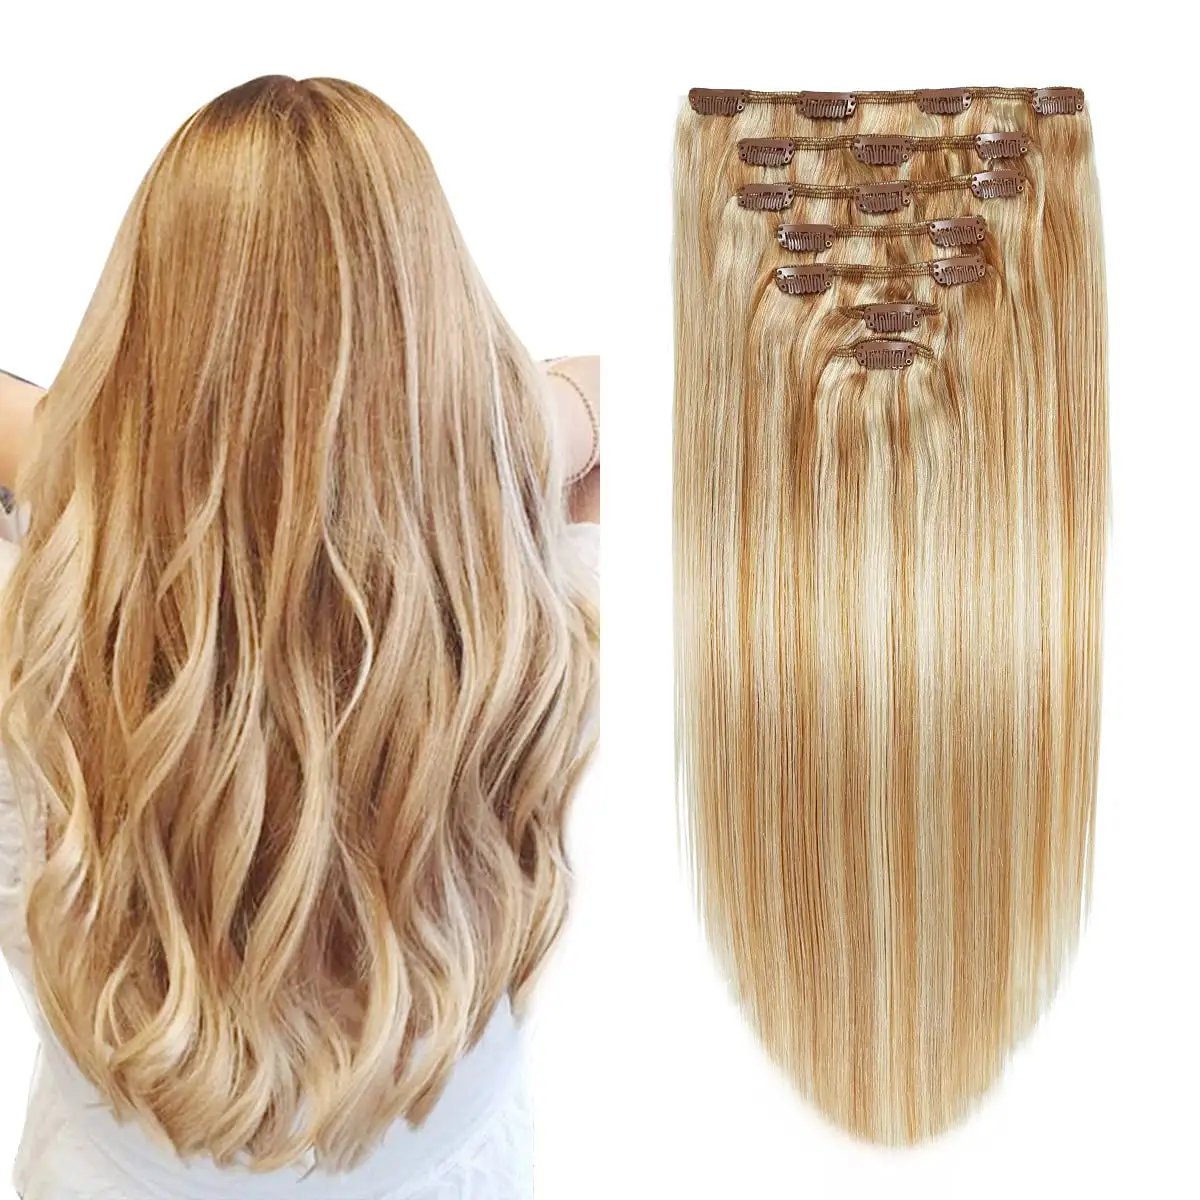 Strawberry Blonde/Bleach Human Hair Extensions Clip Ins 16 inches 7pcs 120g Straight Double Weft Remy Clip in Hair Extensions